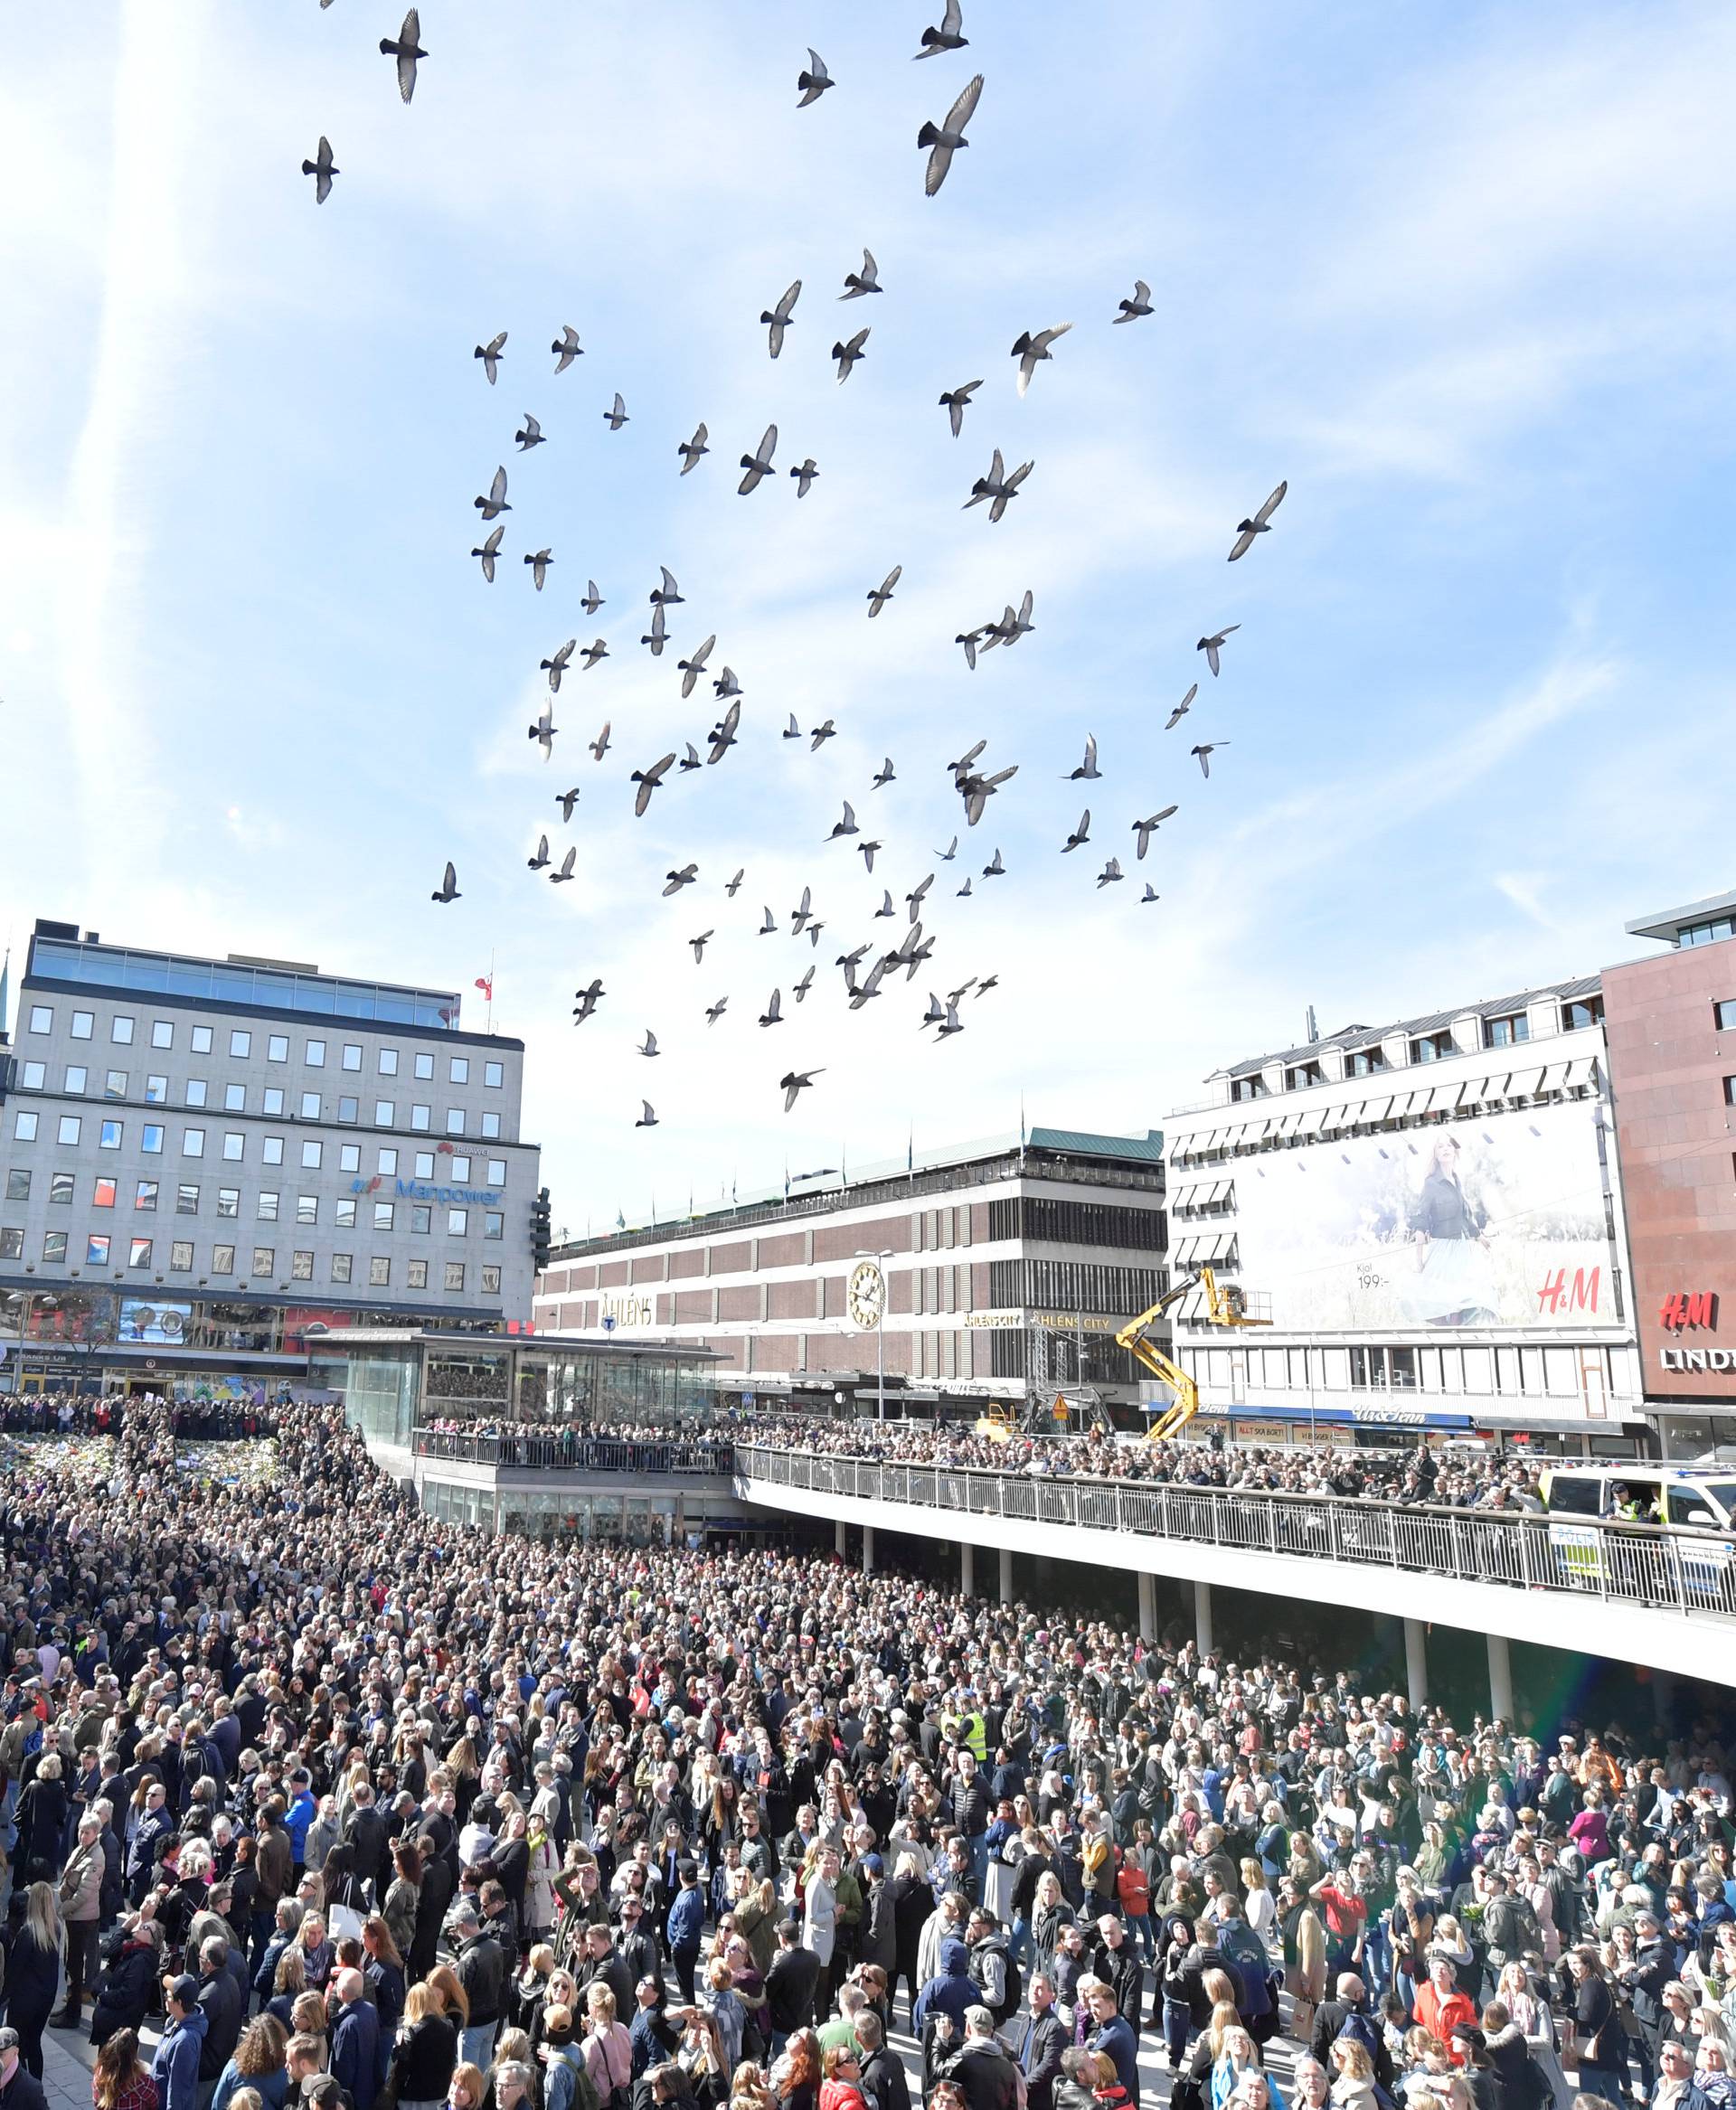 People gather in Sergels torg in central Stockholm for a "Lovefest" vigil against terrorism following Friday's attack